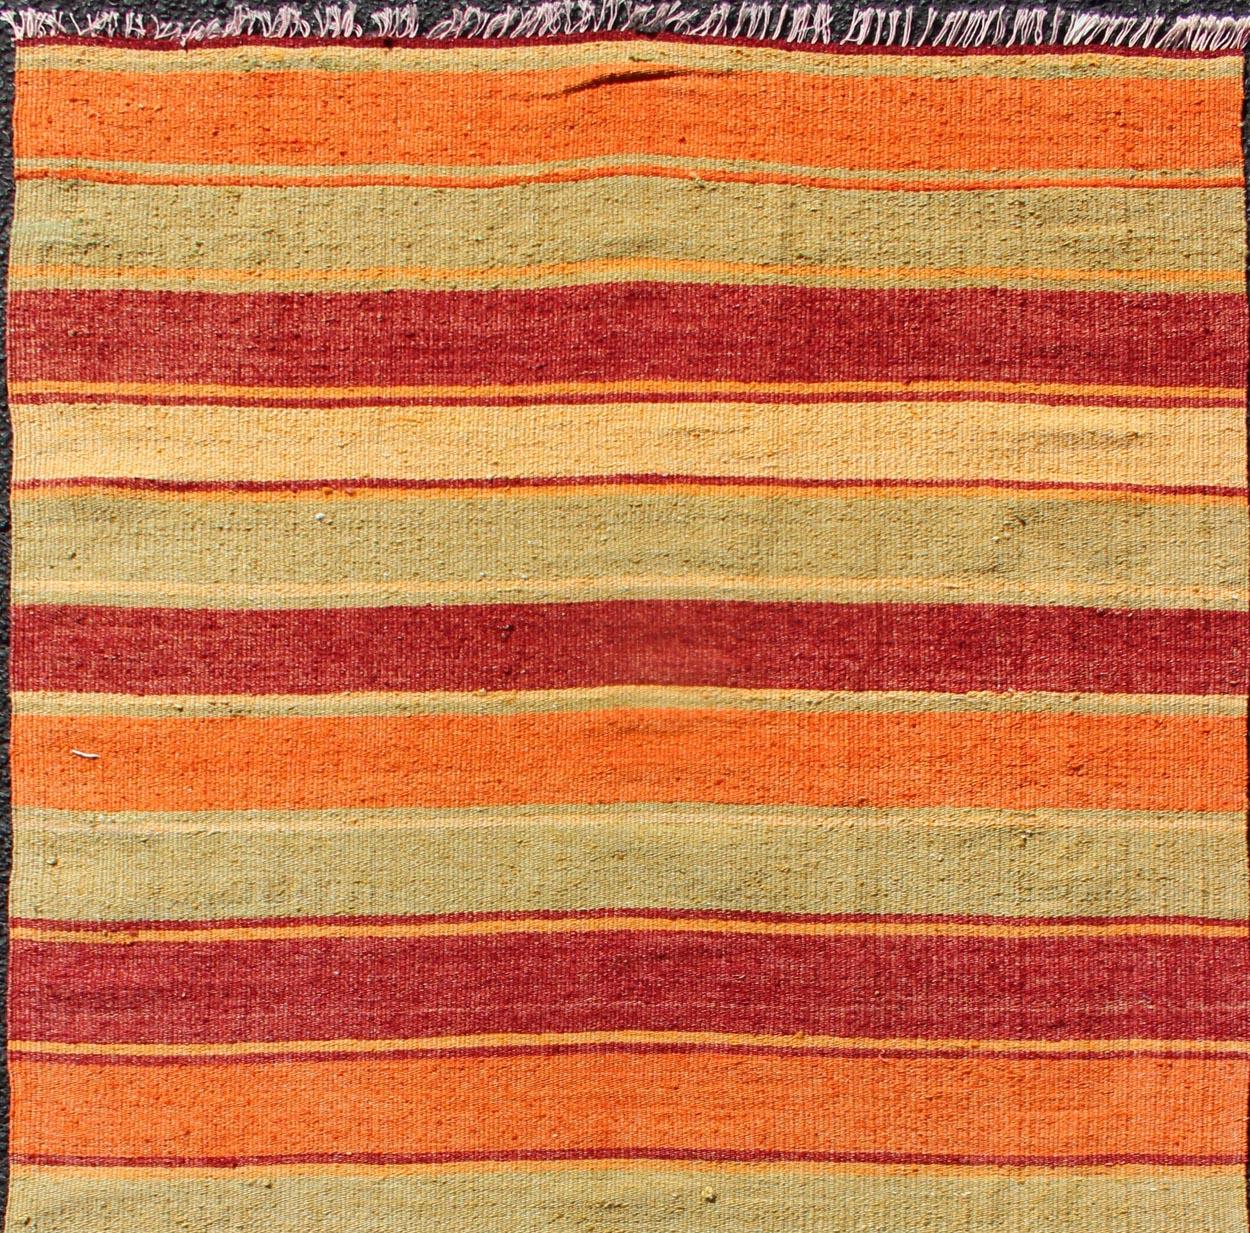 Turkish Kilim runner with stripes in red, green, yellow, orange, rug TU-NED-607, country of origin / type: Turkey / Kilim, circa mid-20th century

Woven during the mid-20th century in Turkey, this designer Kilim is decorated with a horizontal